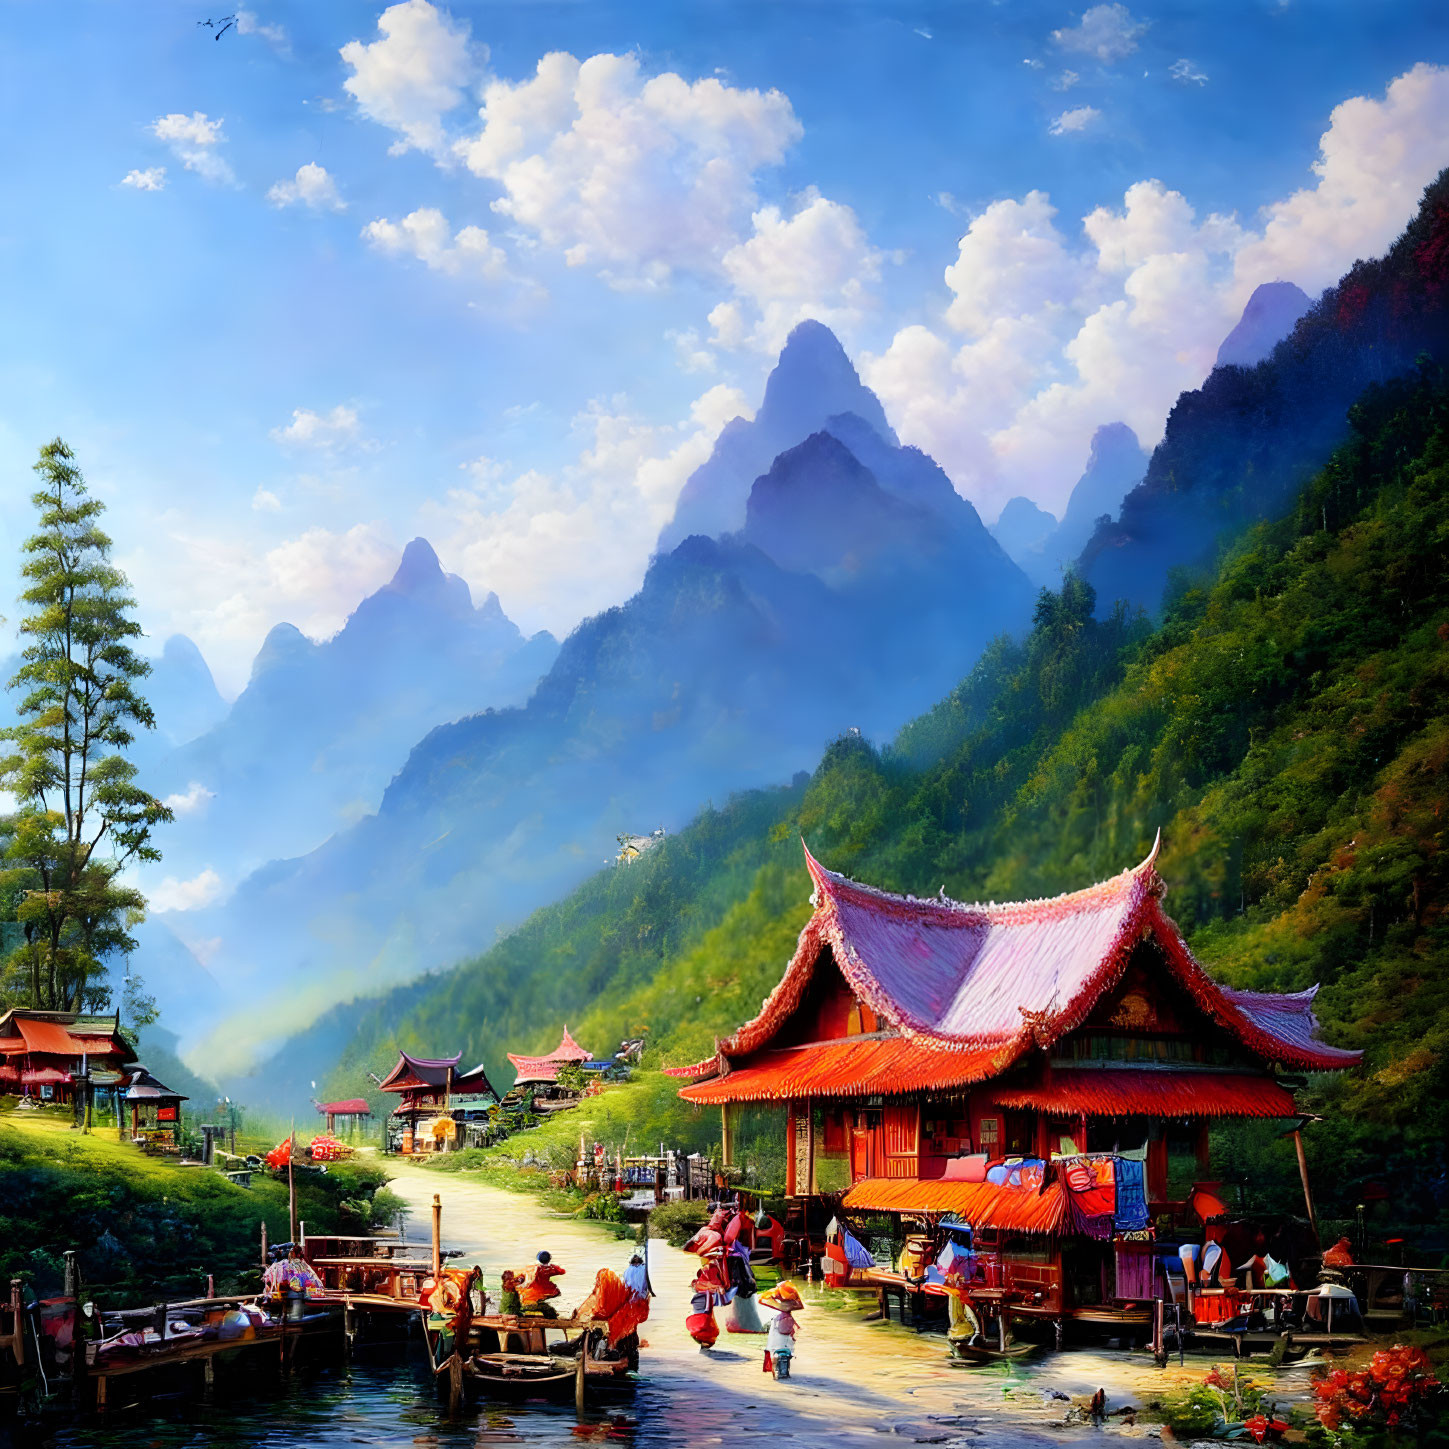 Traditional Asian-style building near river, forested mountains, people in colorful attire